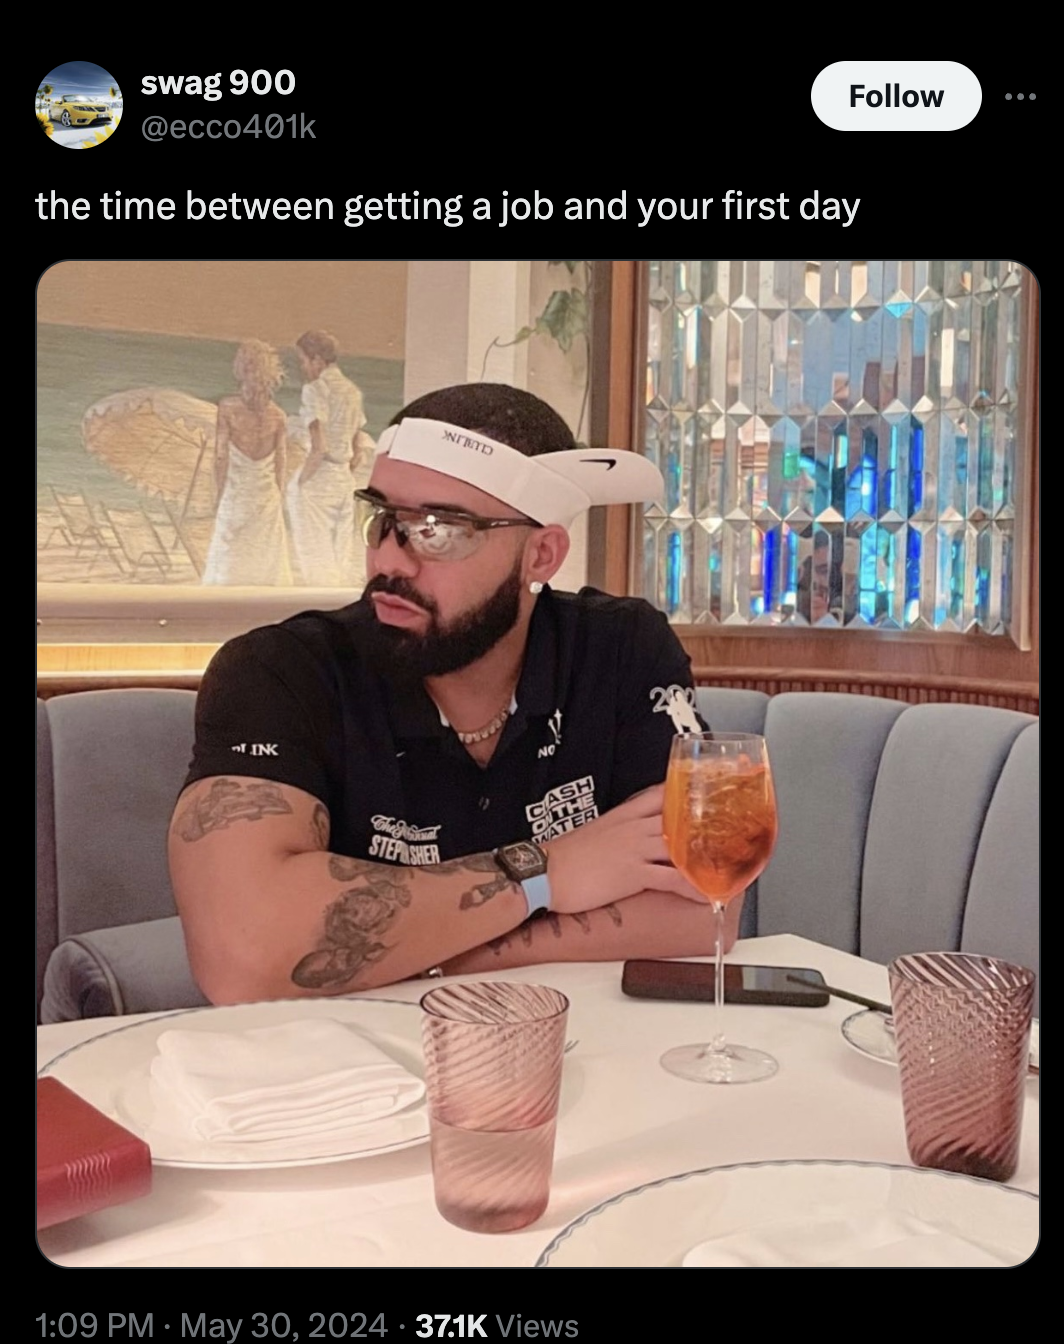 drake with visor - swag 900 the time between getting a job and your first day Norto Stepler Views